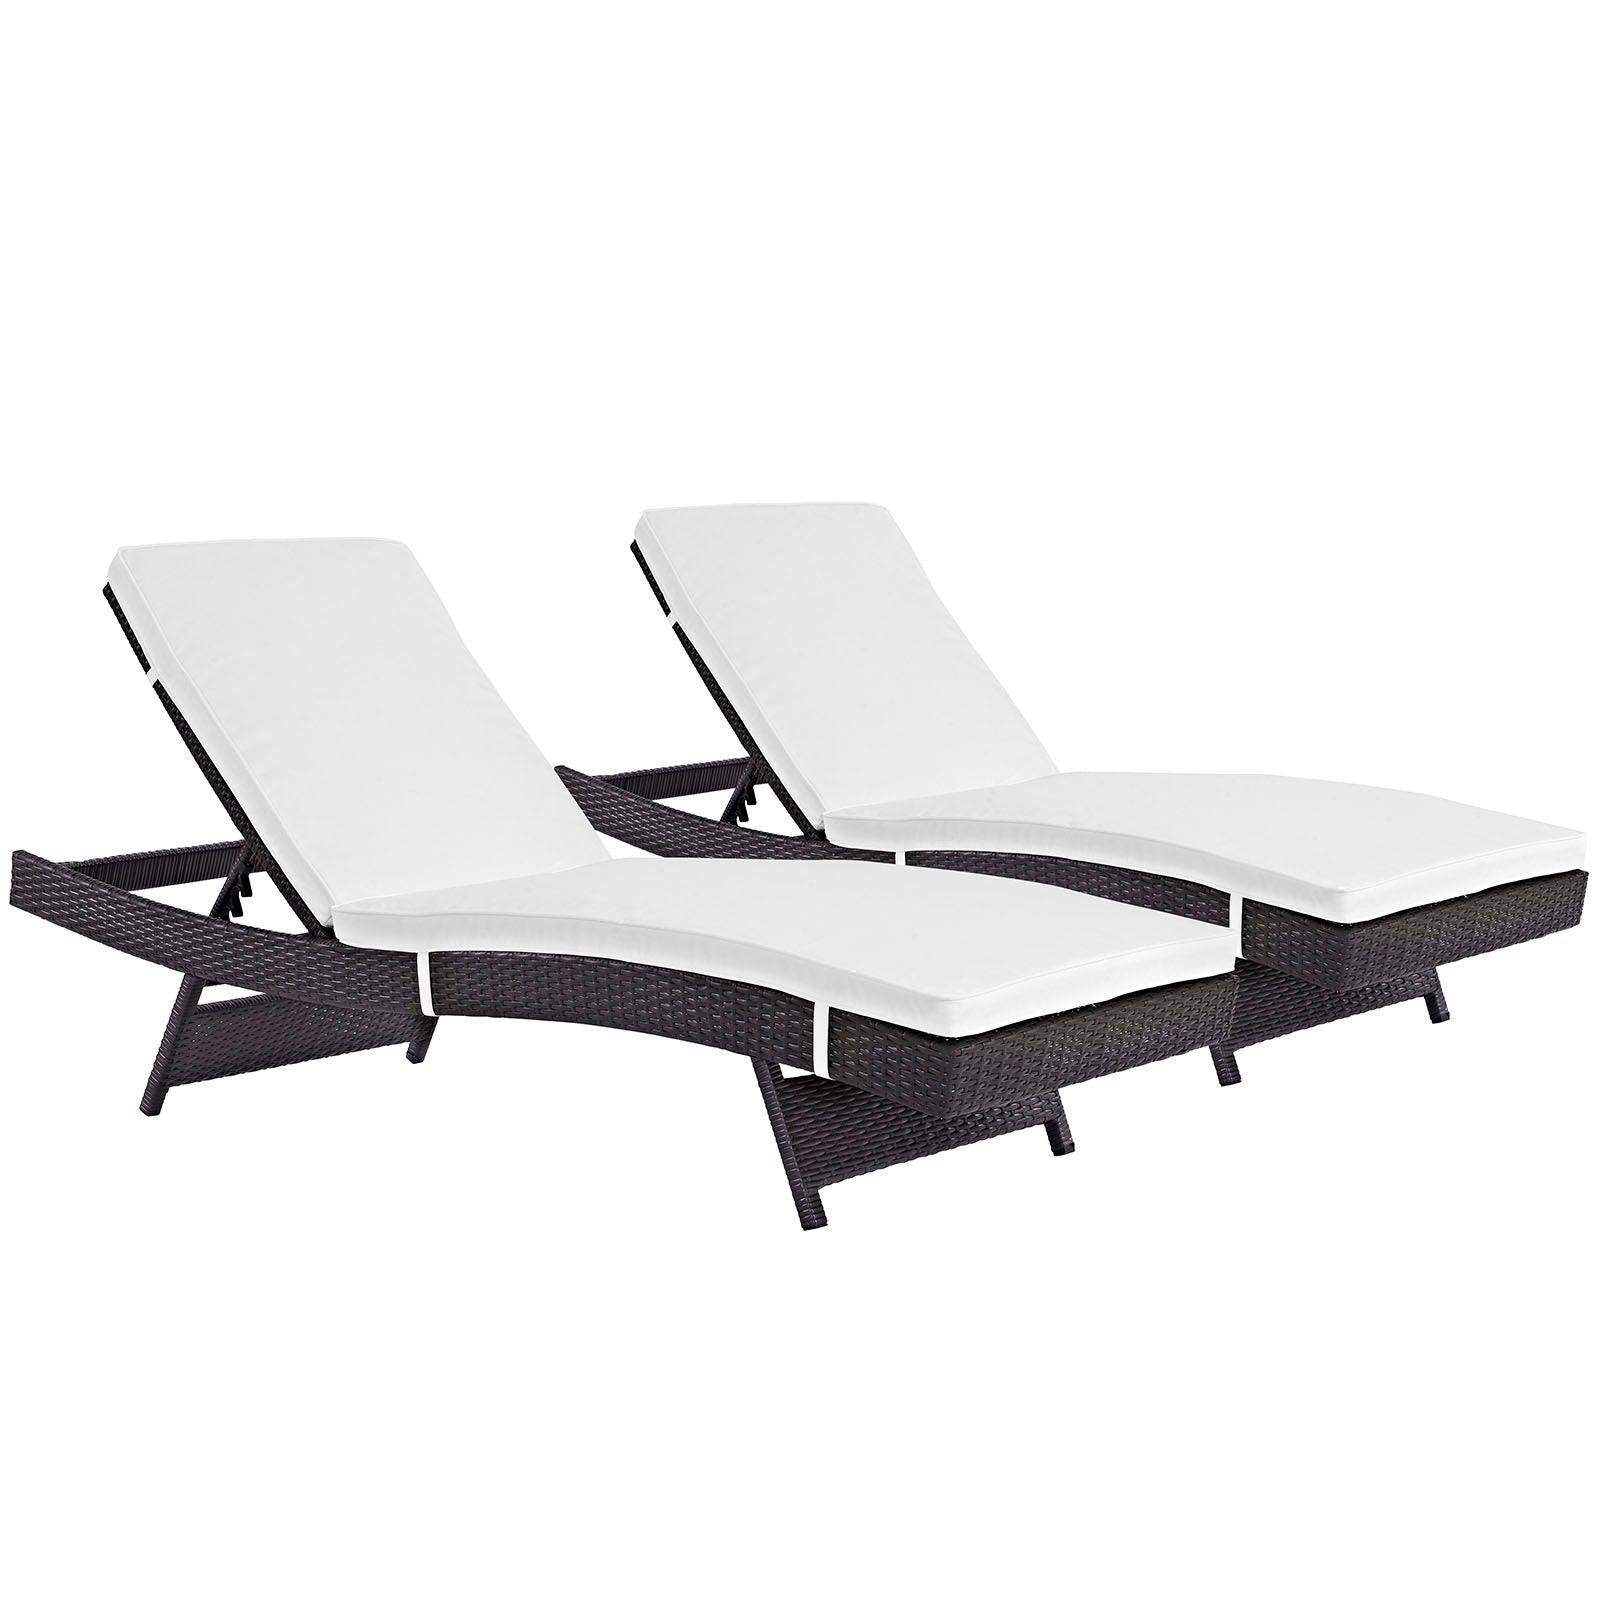 Modway Convene Chaise Outdoor Patio Set of 2 FredCo